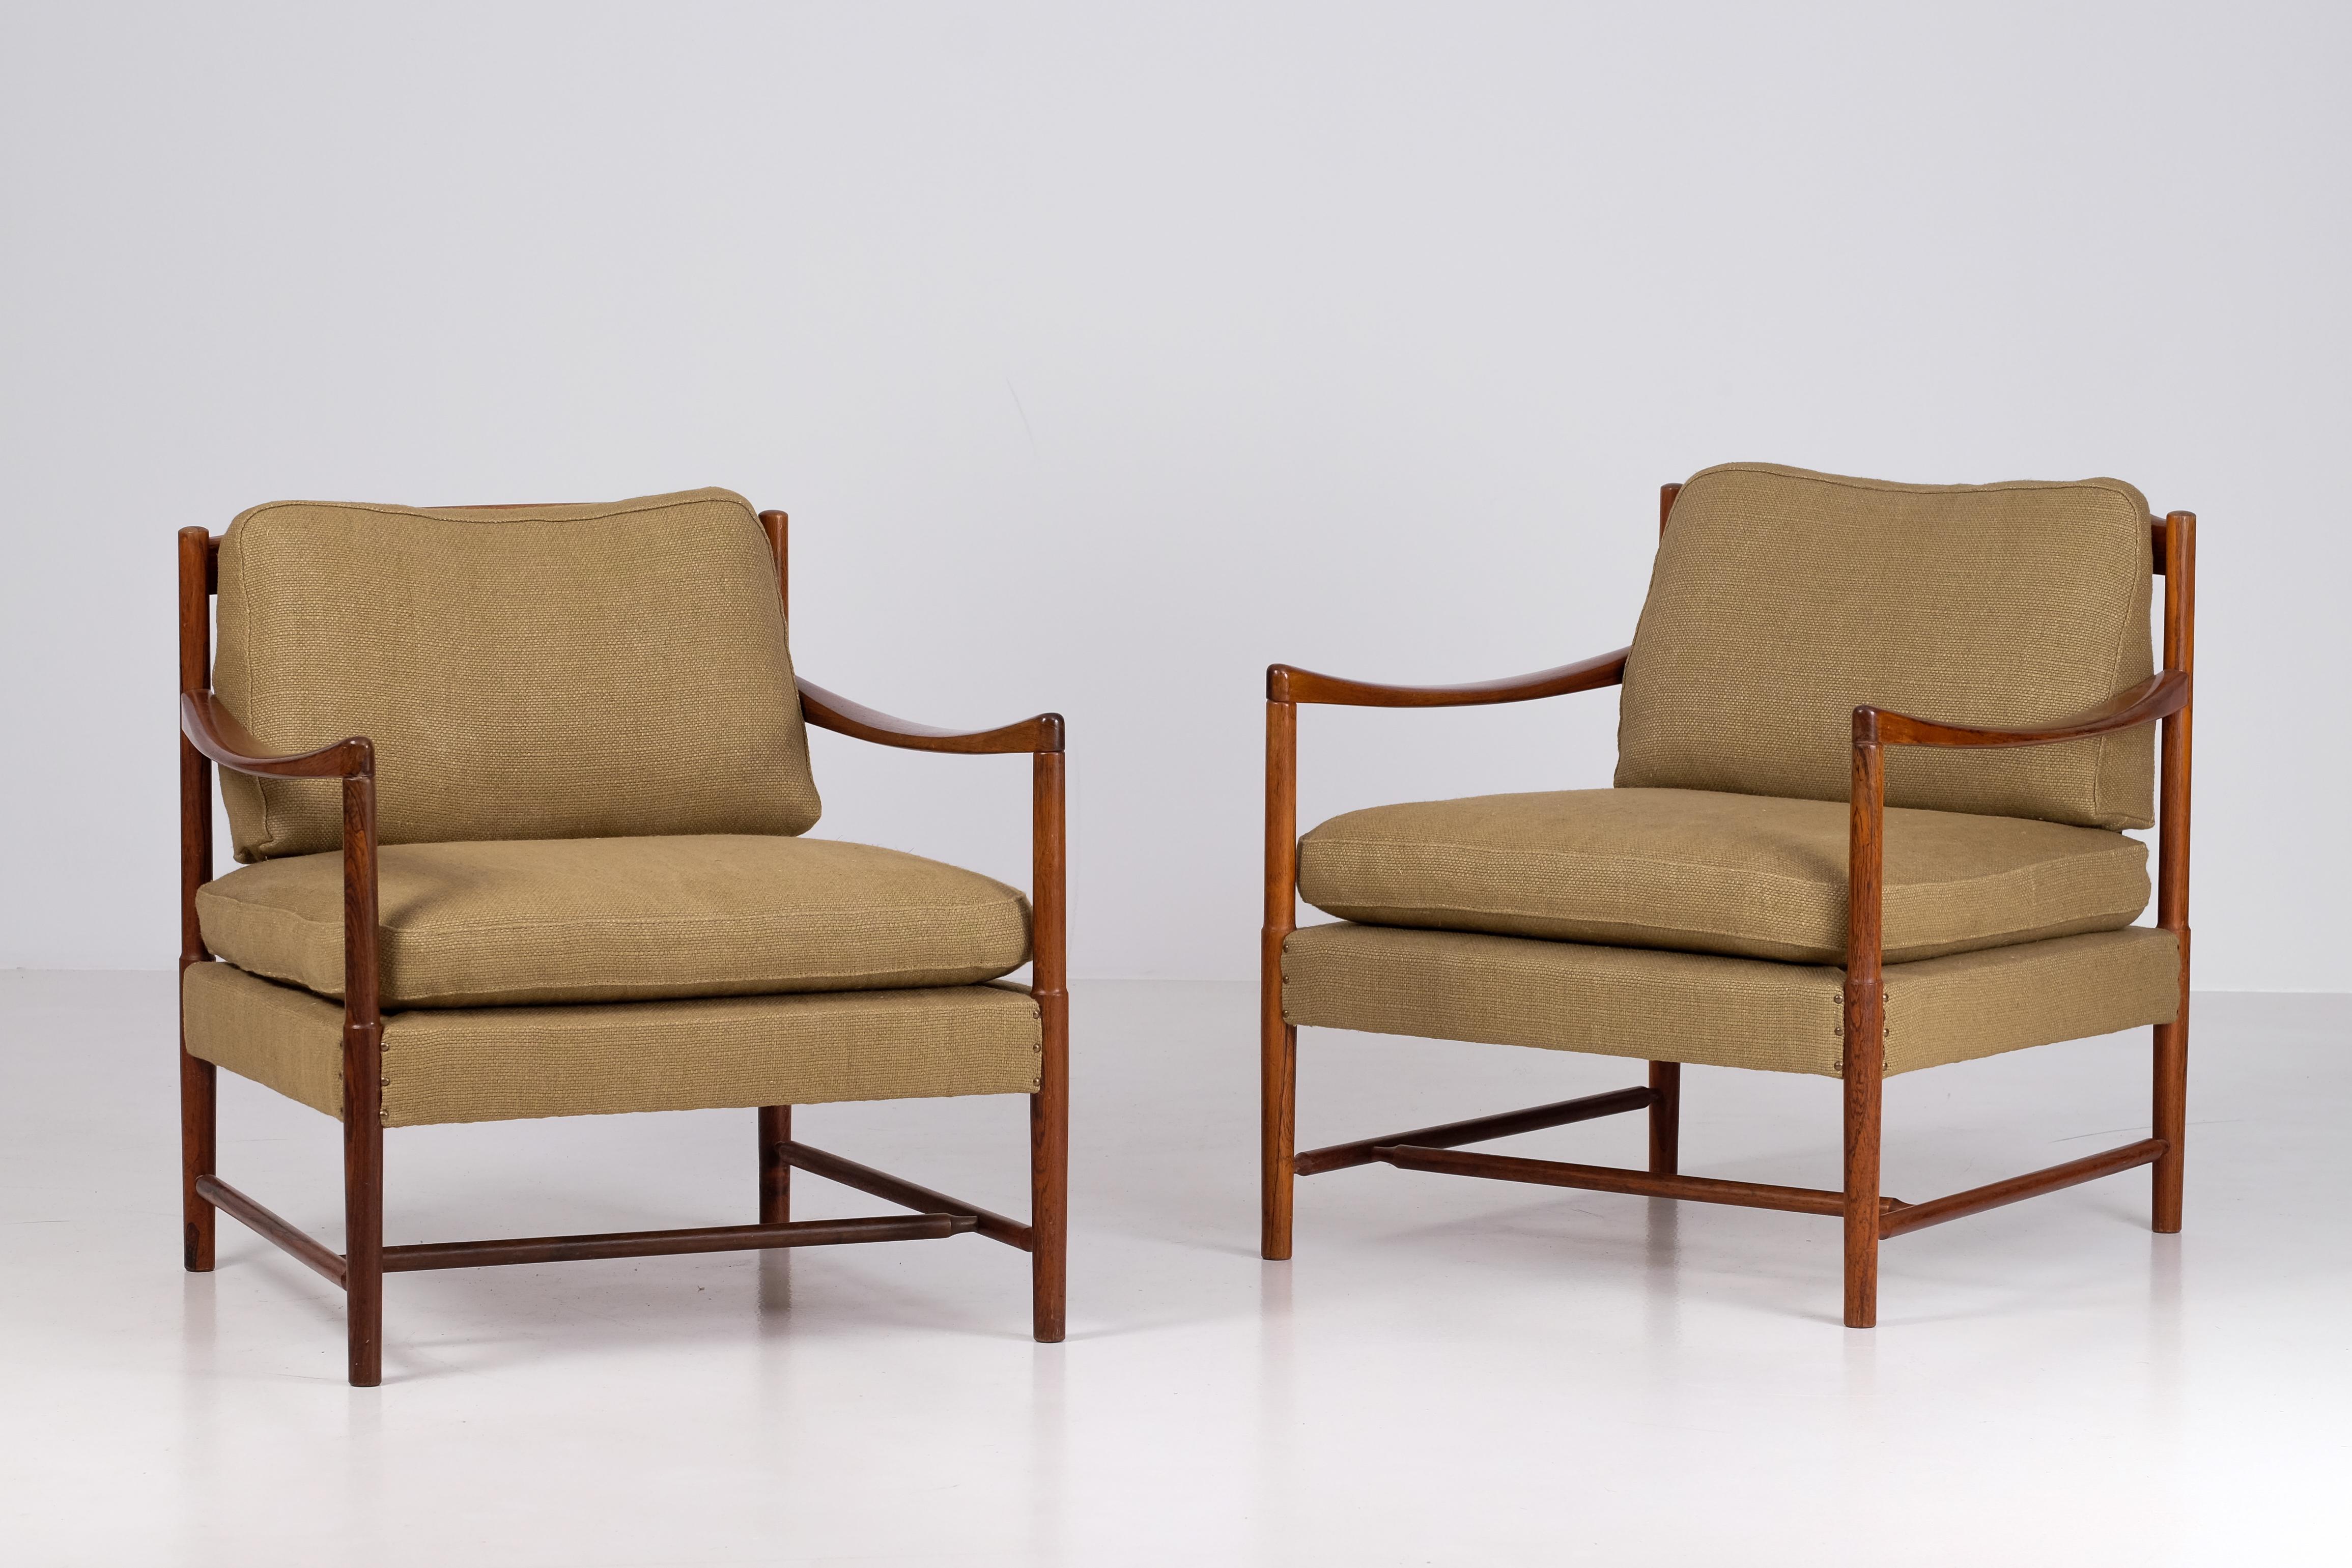 Excellent vintage condition. Produced by AB Lindlöfs Möbler Lammhult, 1960s.
Newly upholstered.